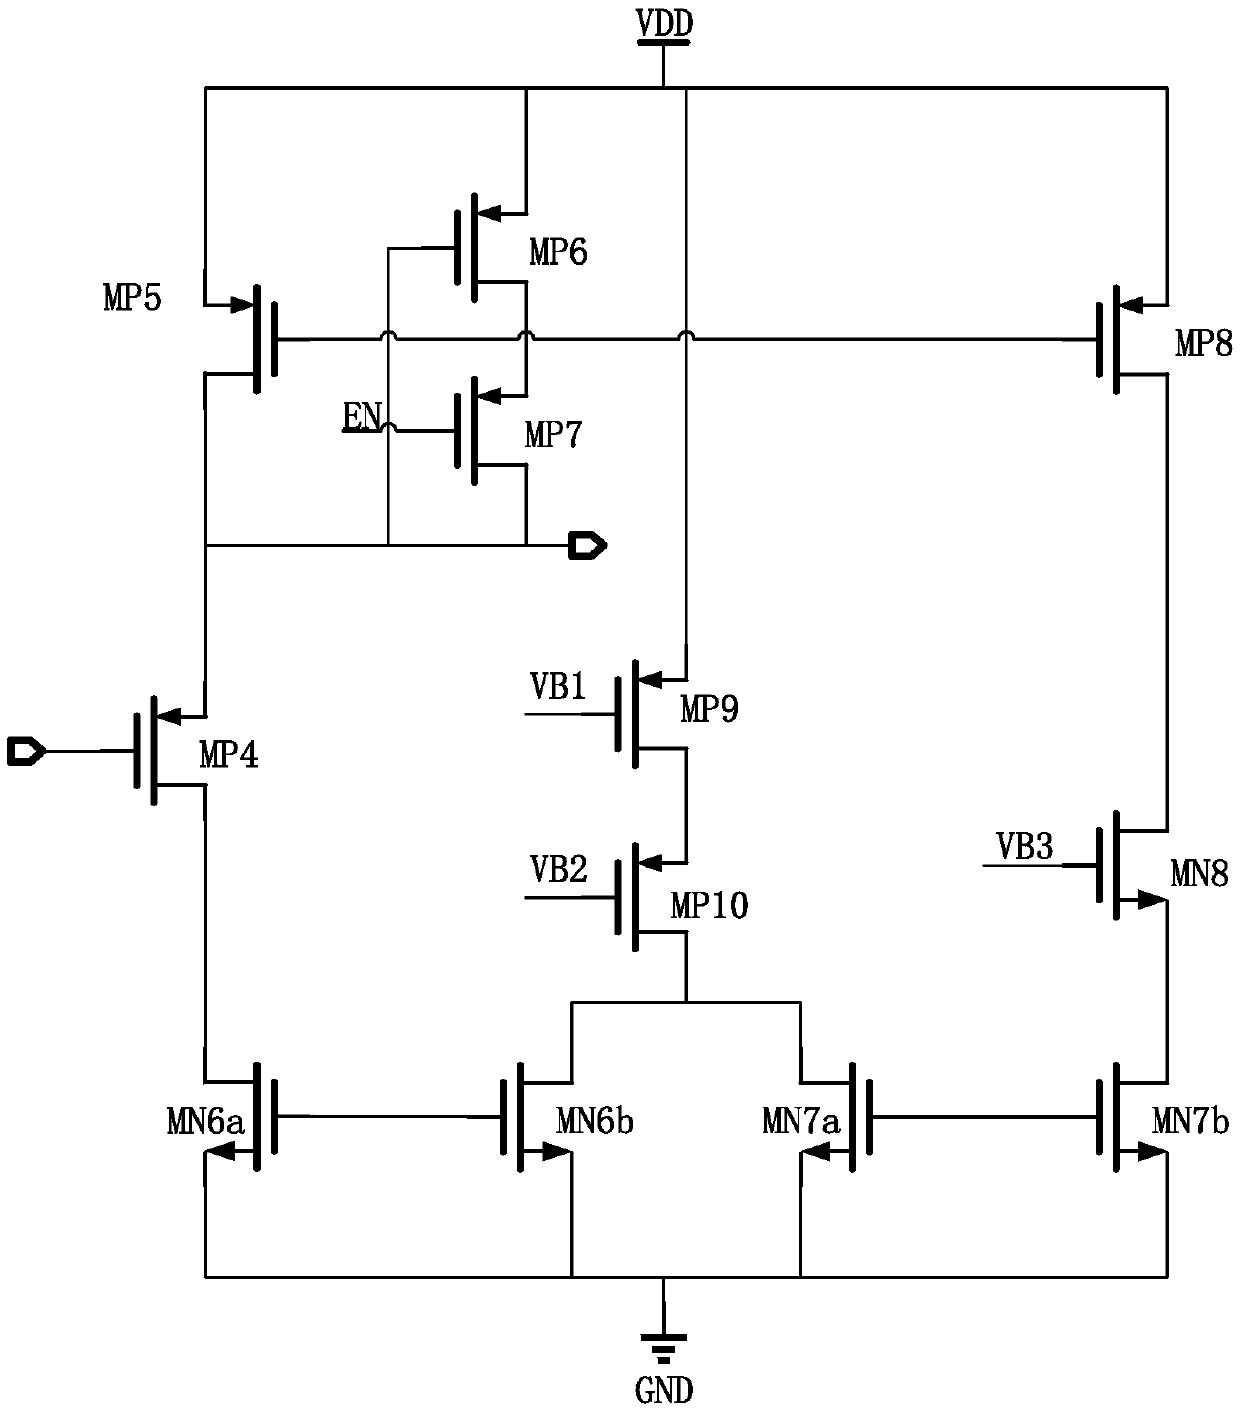 Voltage buffer applied to SAR (Successive Approximation Register) ADC (Analog to Digital Converter)